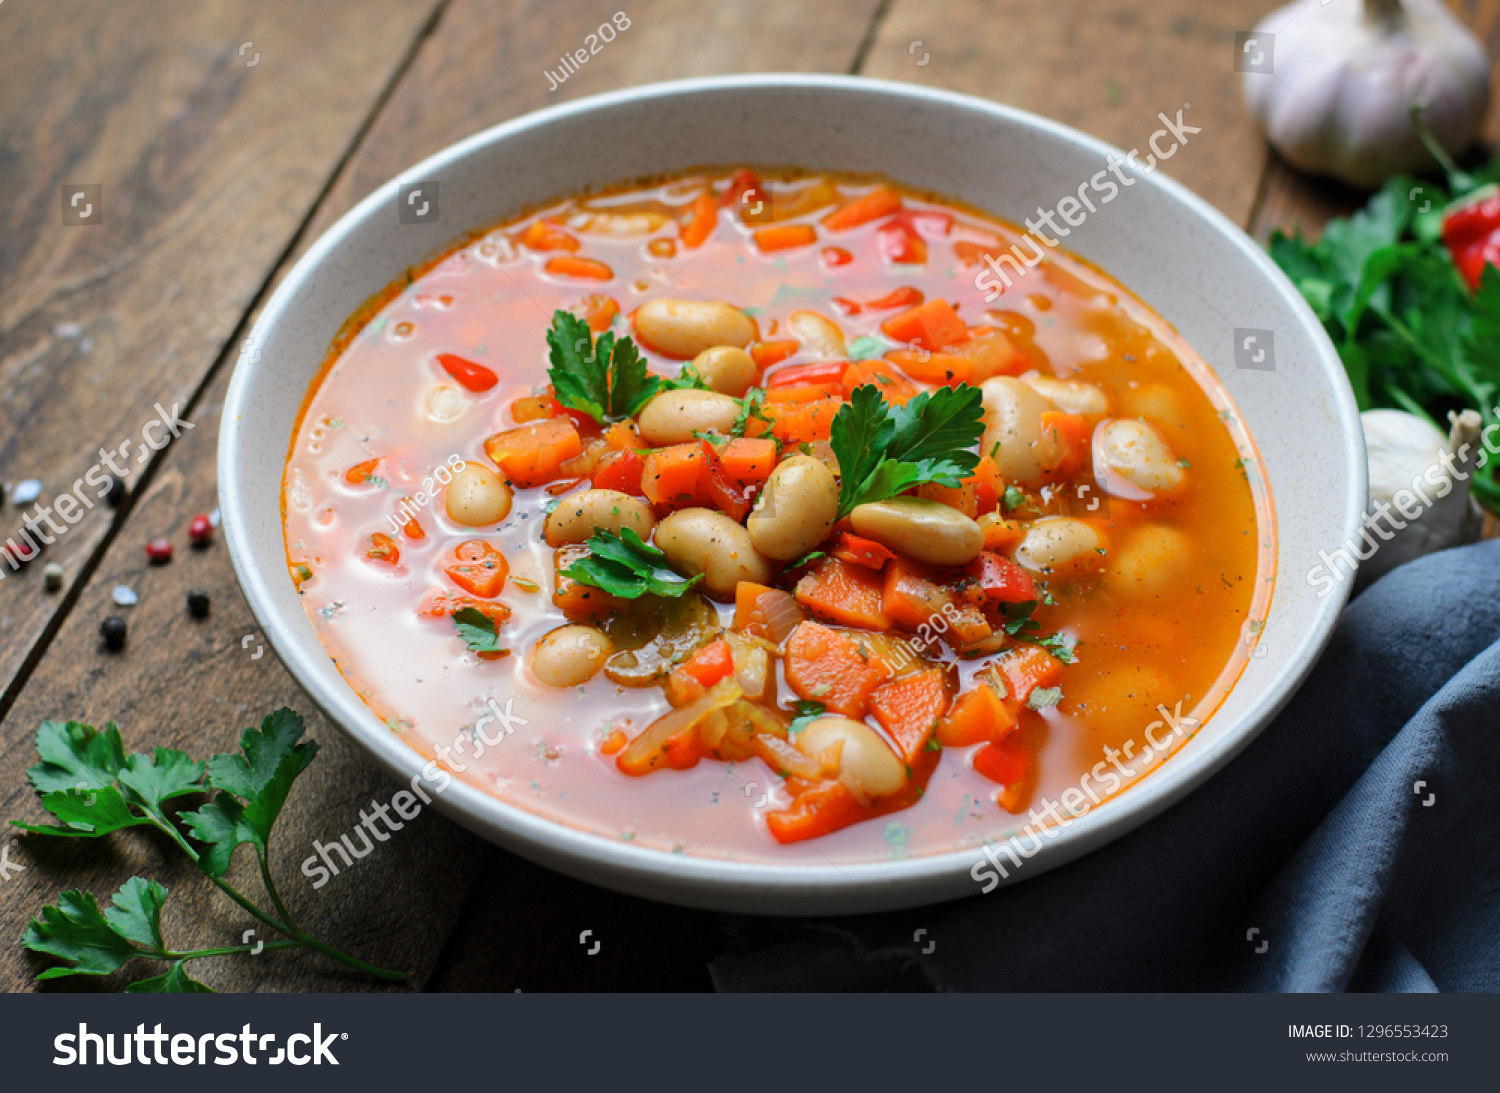 Vegetable Soup with White Beans, Homemade Soup on Dark Wooden Background, Vegetarian Food, Top View #1296553423